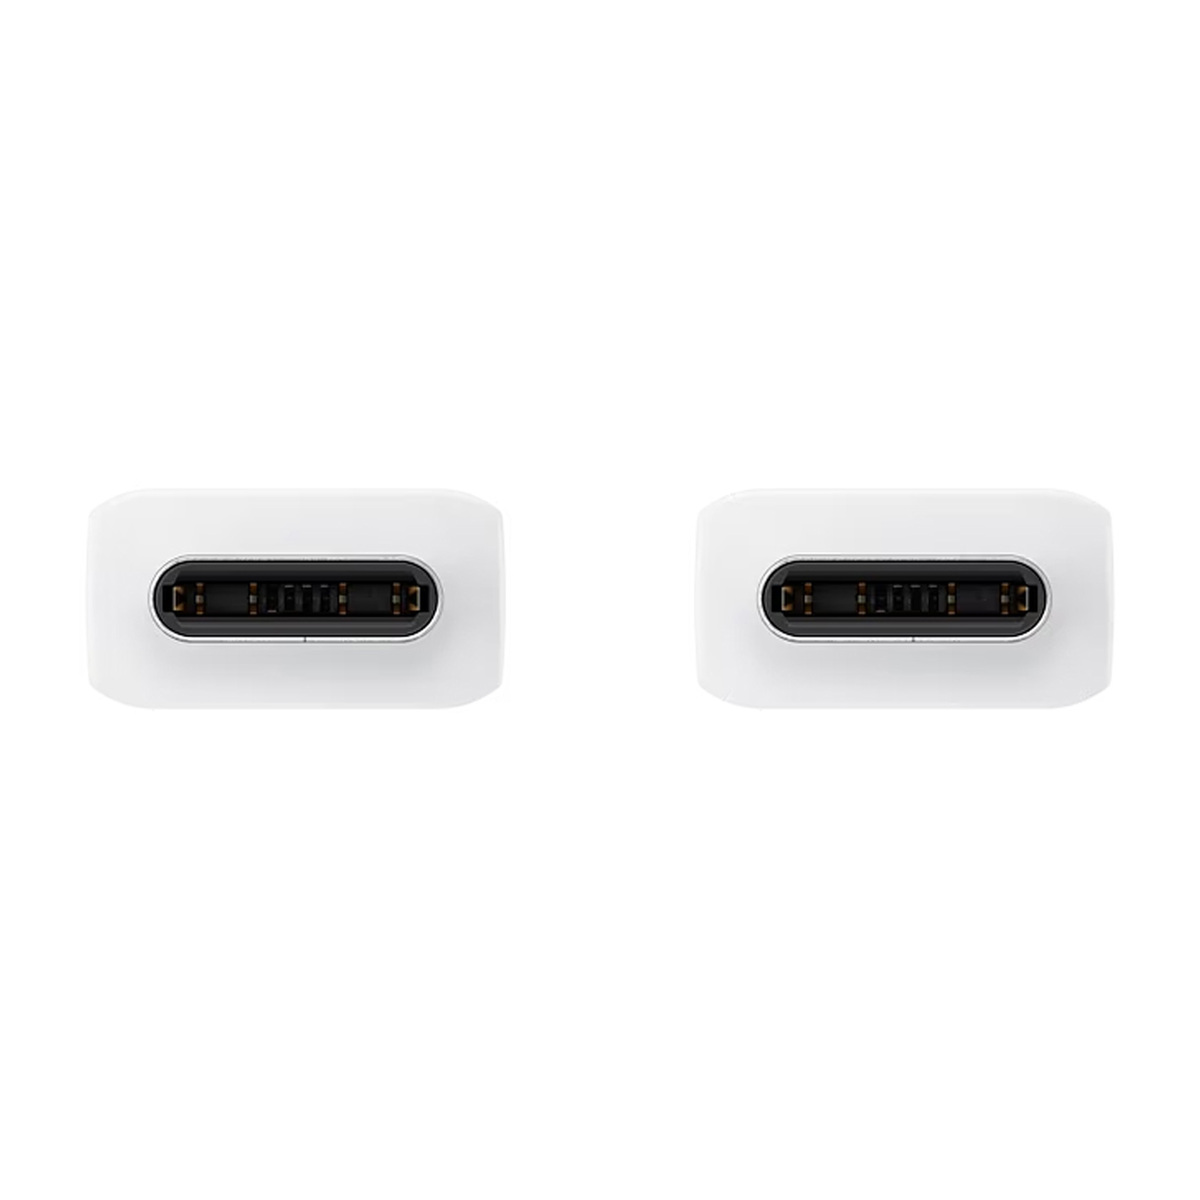 Samsung 5A USB-C to USB-C Cable, 1.8 m, White, EP-DX510JWEGWW